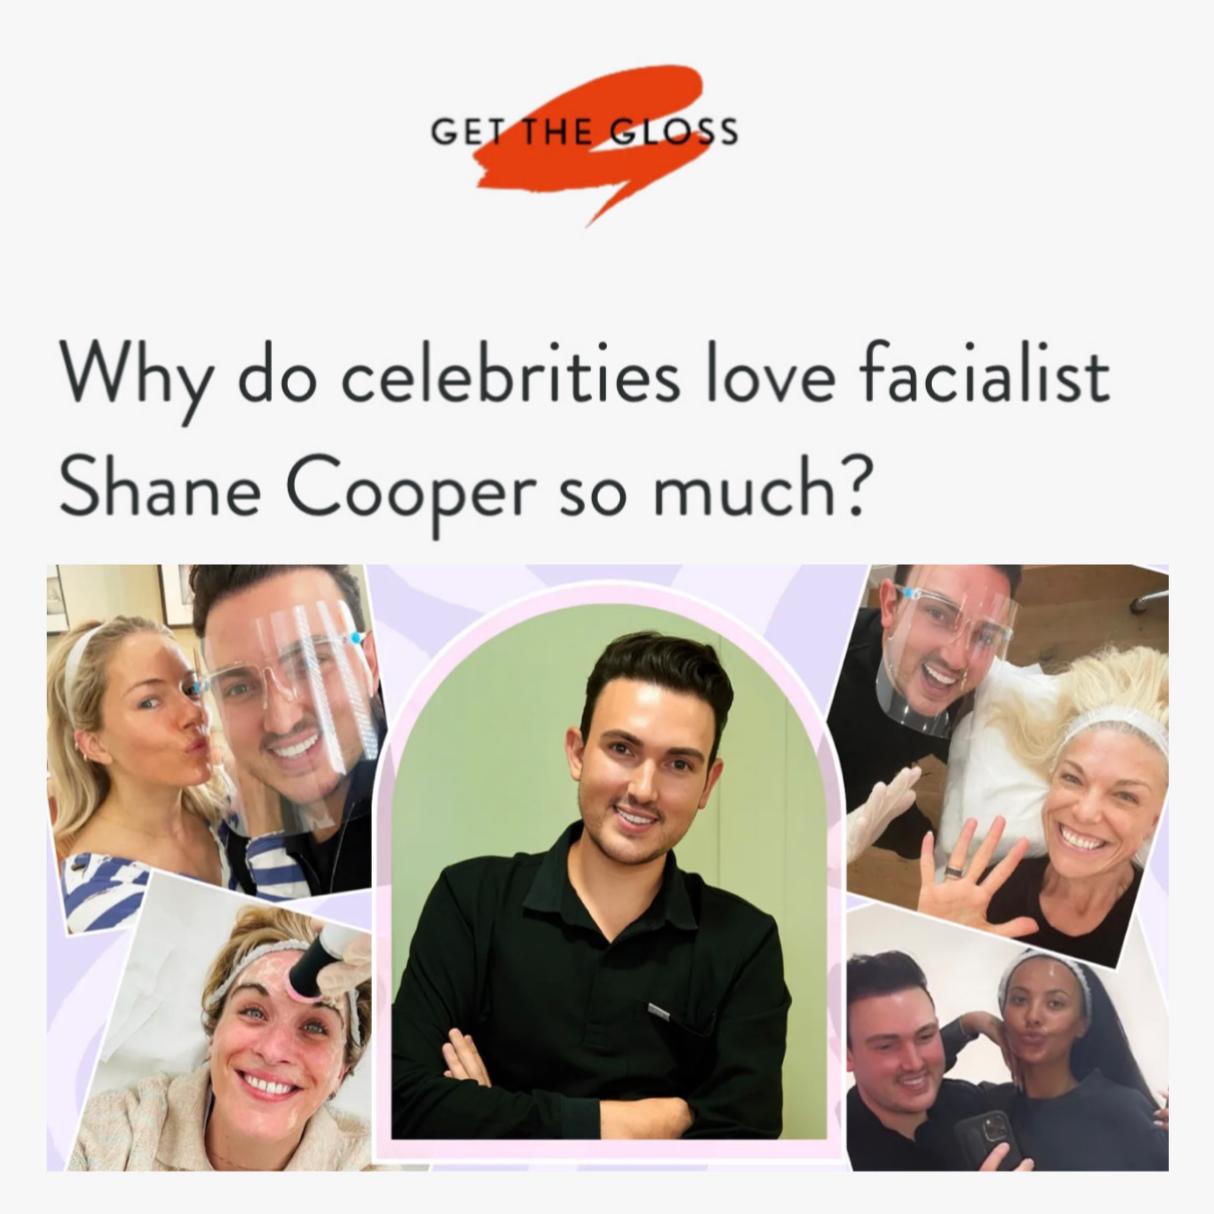 Get The Gloss: Why do celebrities love facialist Shane Cooper so much?